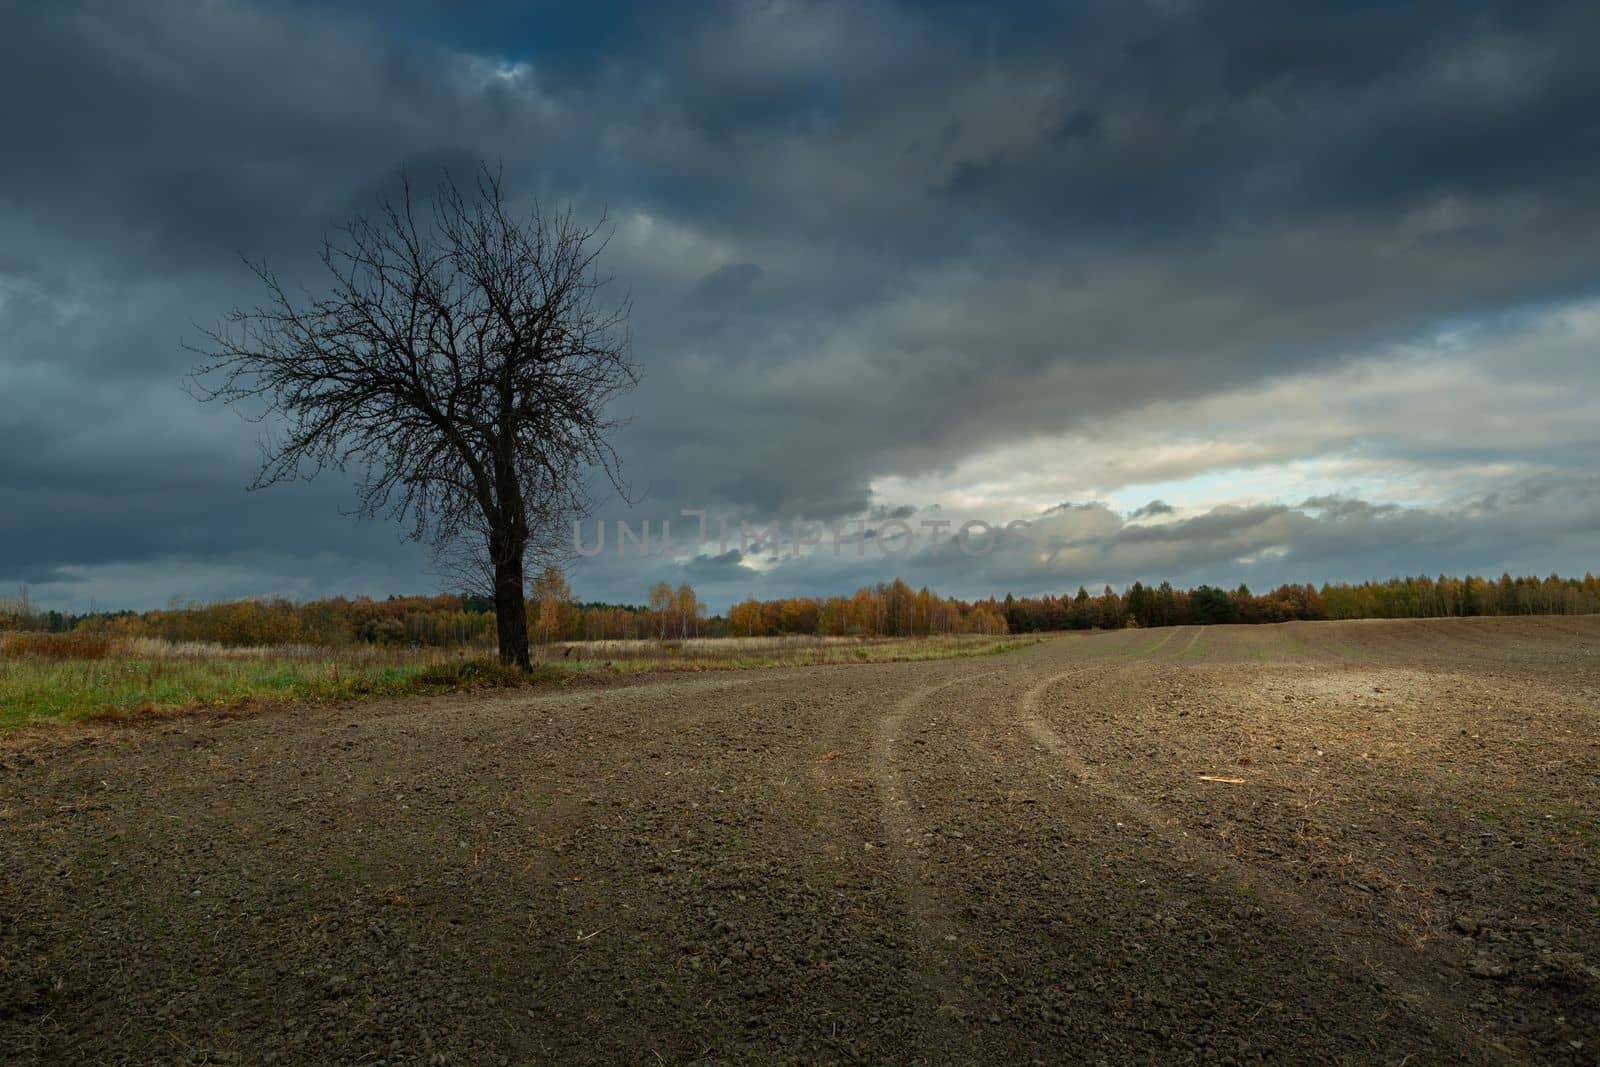 Bare tree growing in a field and overcast sky by darekb22